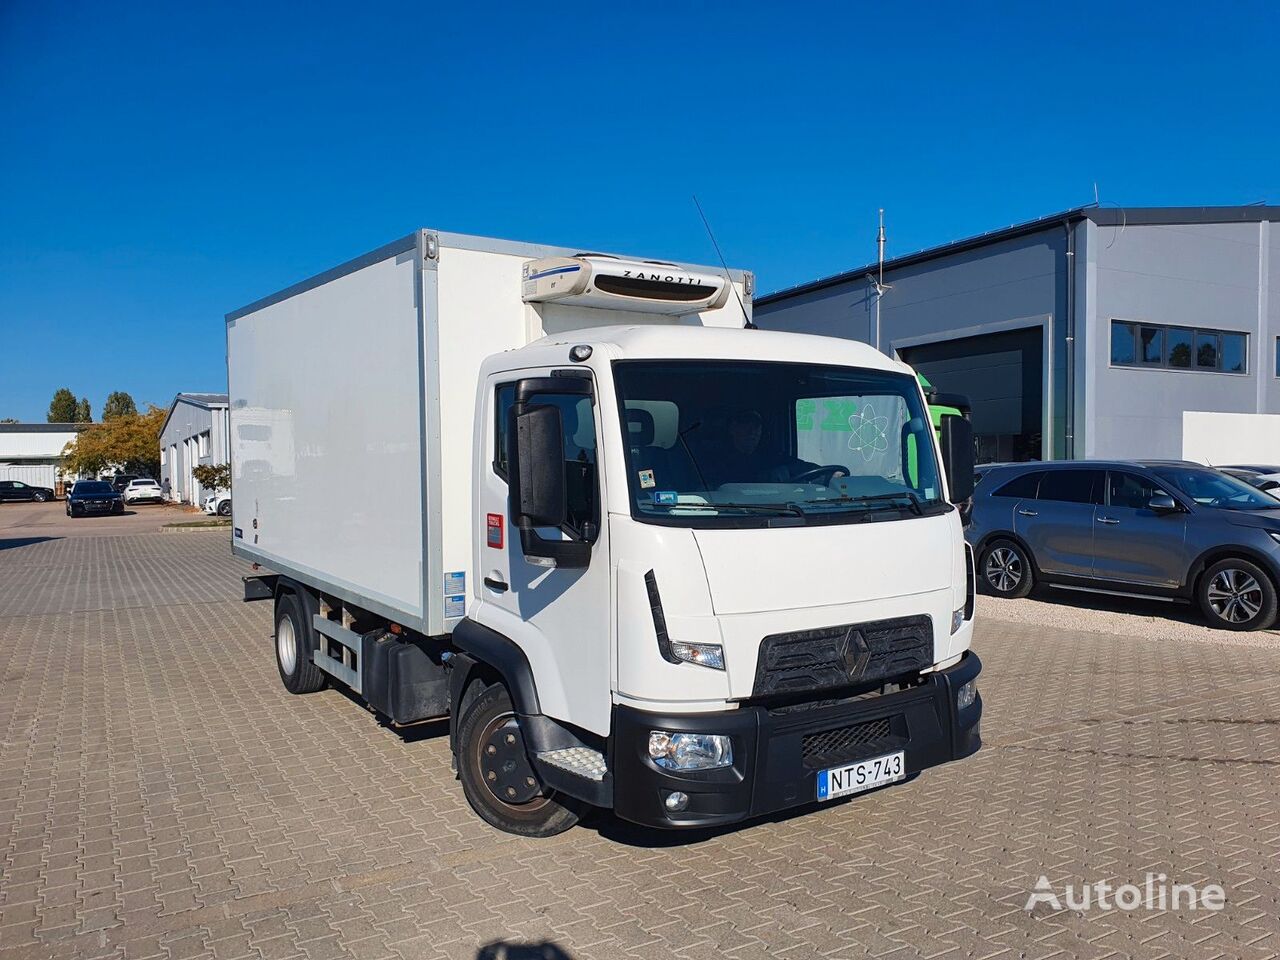 Renault D 7.5 refrigerated truck